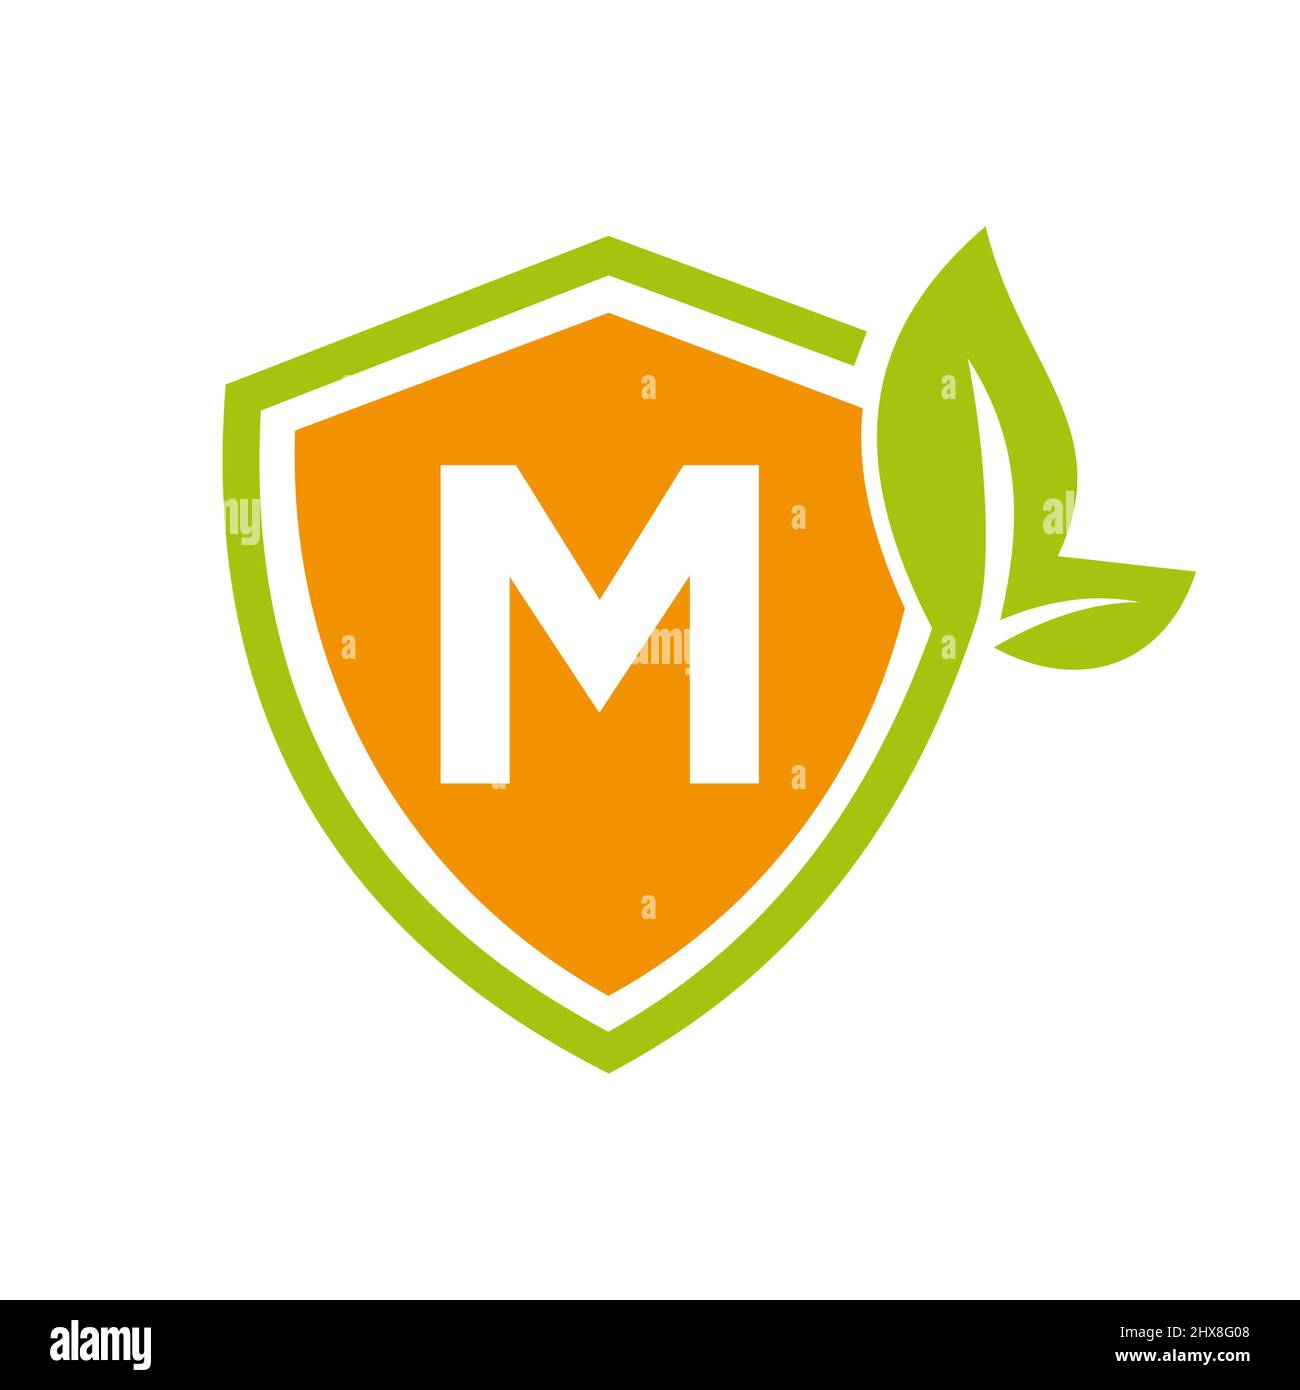 Eco Leaf Agriculture Logo On Letter M Vector Template. Eco Sign, Agronomy, Wheat Farm, Rural Country Farming, Natural Harvest Concept Stock Vector